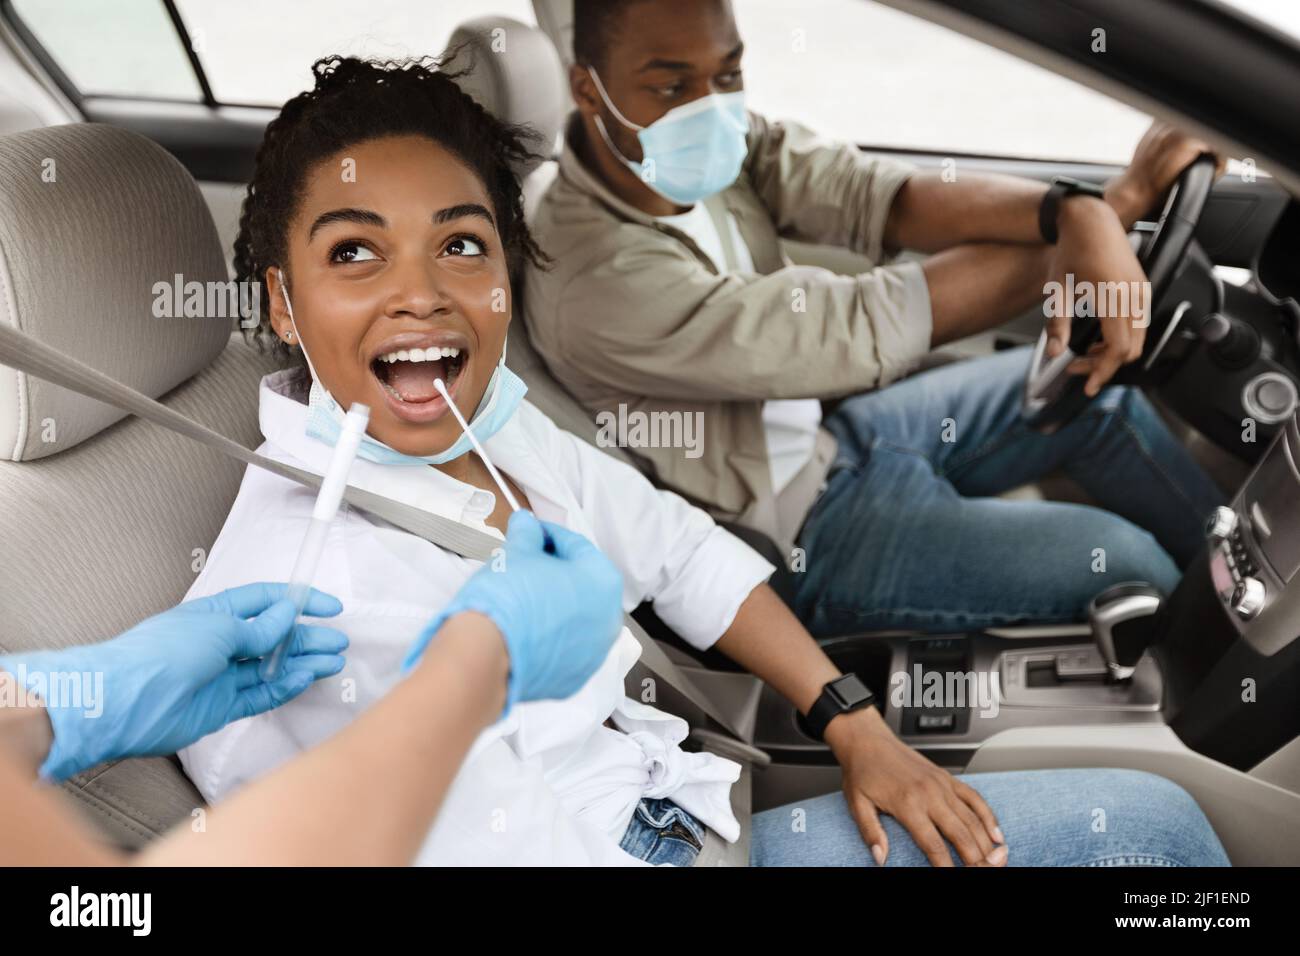 Black Woman Getting Tested For Covid-19 Sitting In Auto Stock Photo